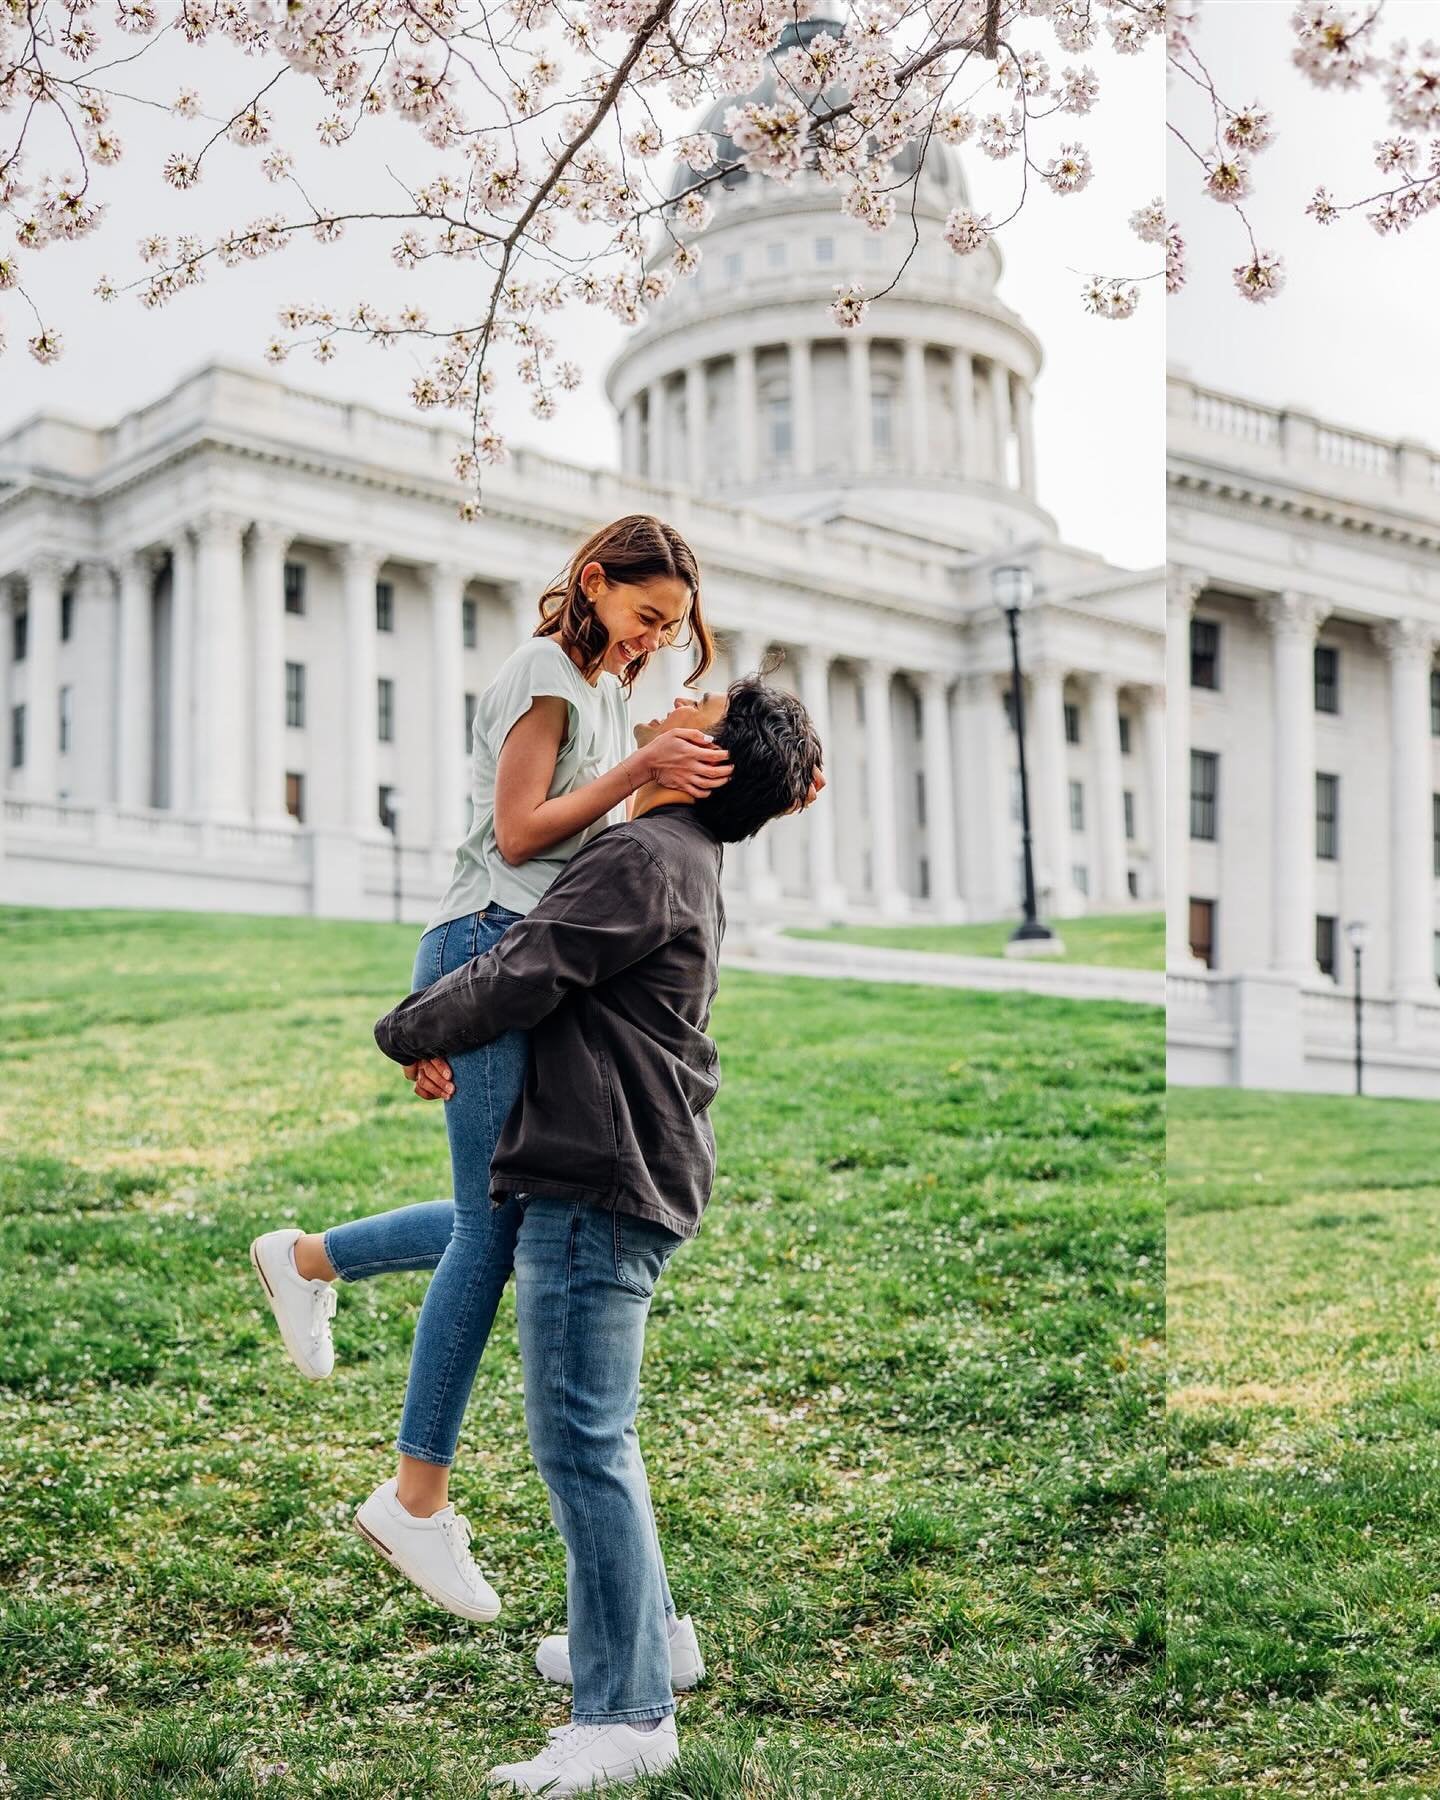 Would you believe me if I told you this was only the last 15 minutes of Ellen and Seth&rsquo;s engagement session and I still have a full card of over 1000 photos to go through?!? 😍 This was a beautiful, and chilly 🥶, morning at the Utah Capital bu